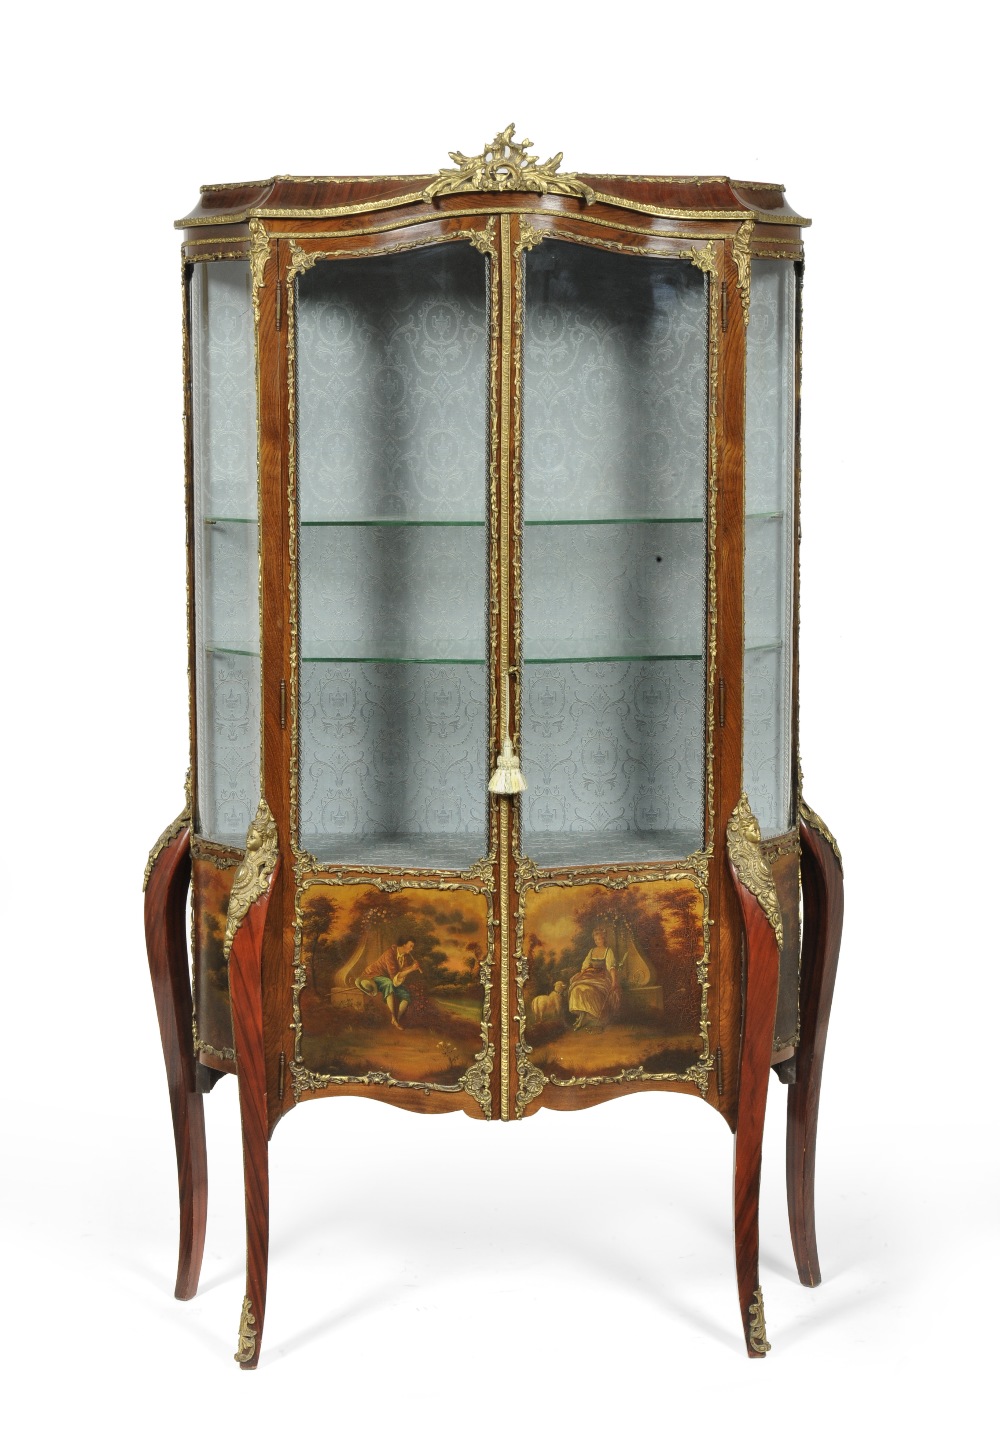 A Louis XV Style Rosewood and Gilt Metal Mounted Vitrine, early 20th century, the lower section